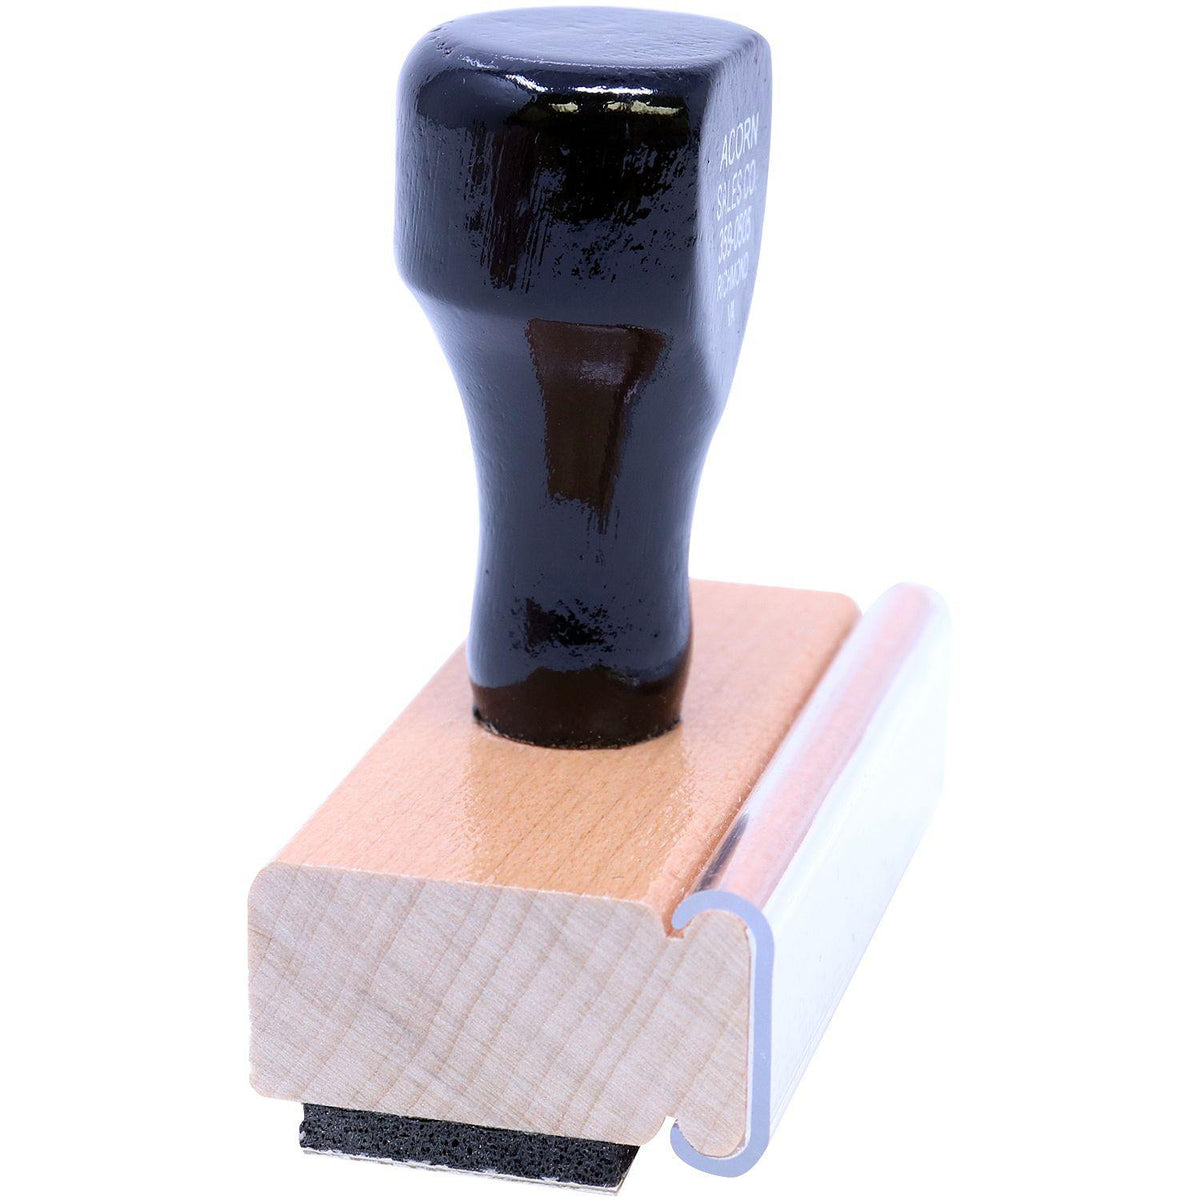 Side View of Large Attorneys&#39; Copy Rubber Stamp at an Angle